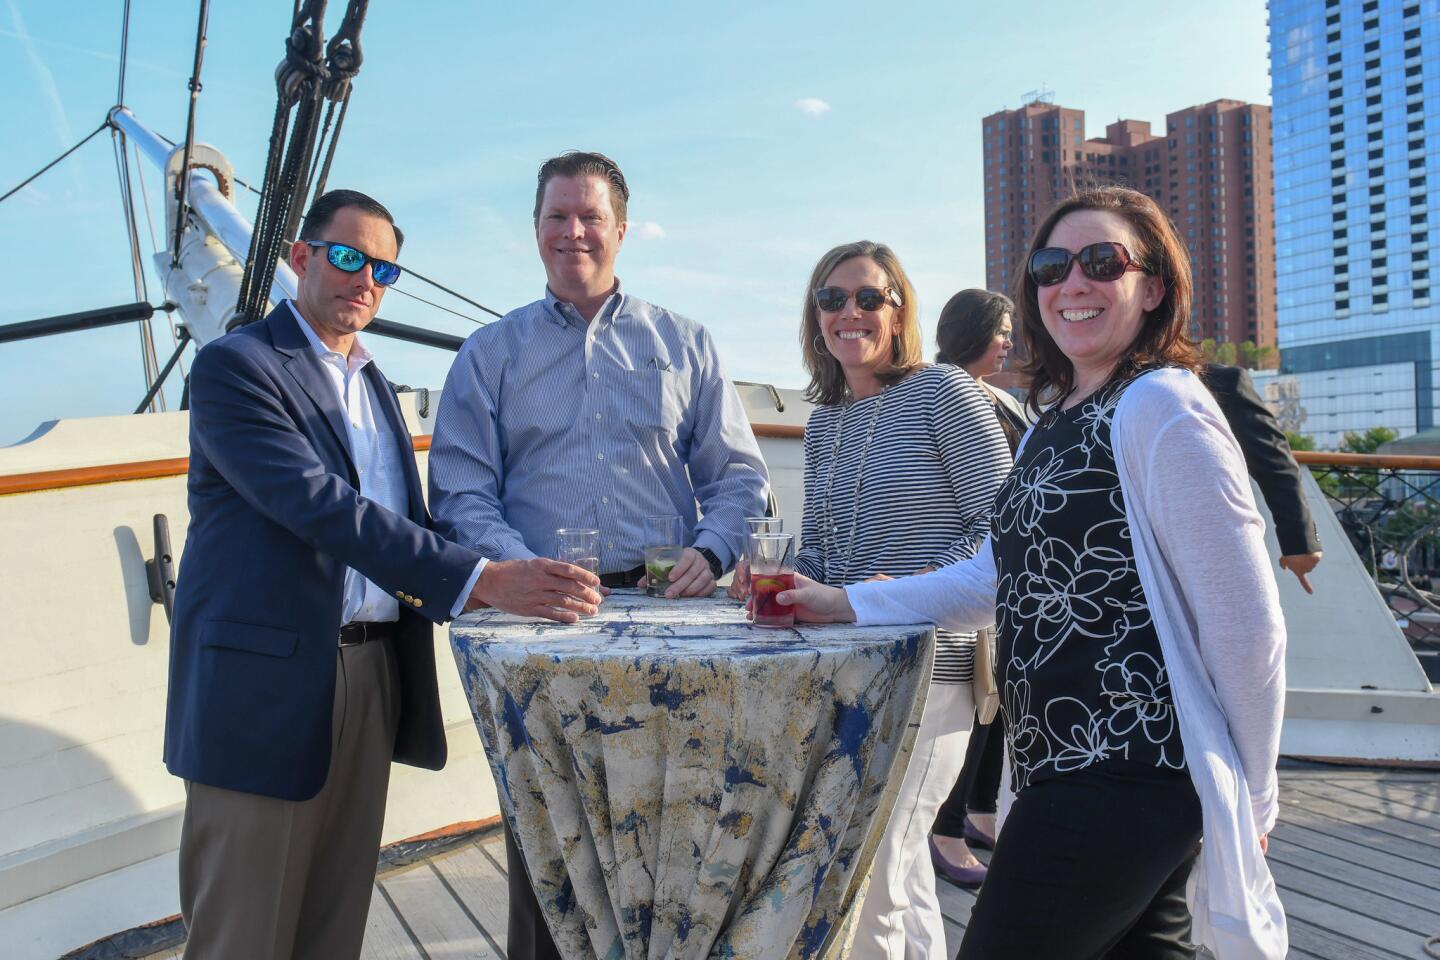 David Berger, left, William Bradley, Missy Berger and Trish Bradley attended Historic Ships' Captain's Jubilee on board the USS Constellation.